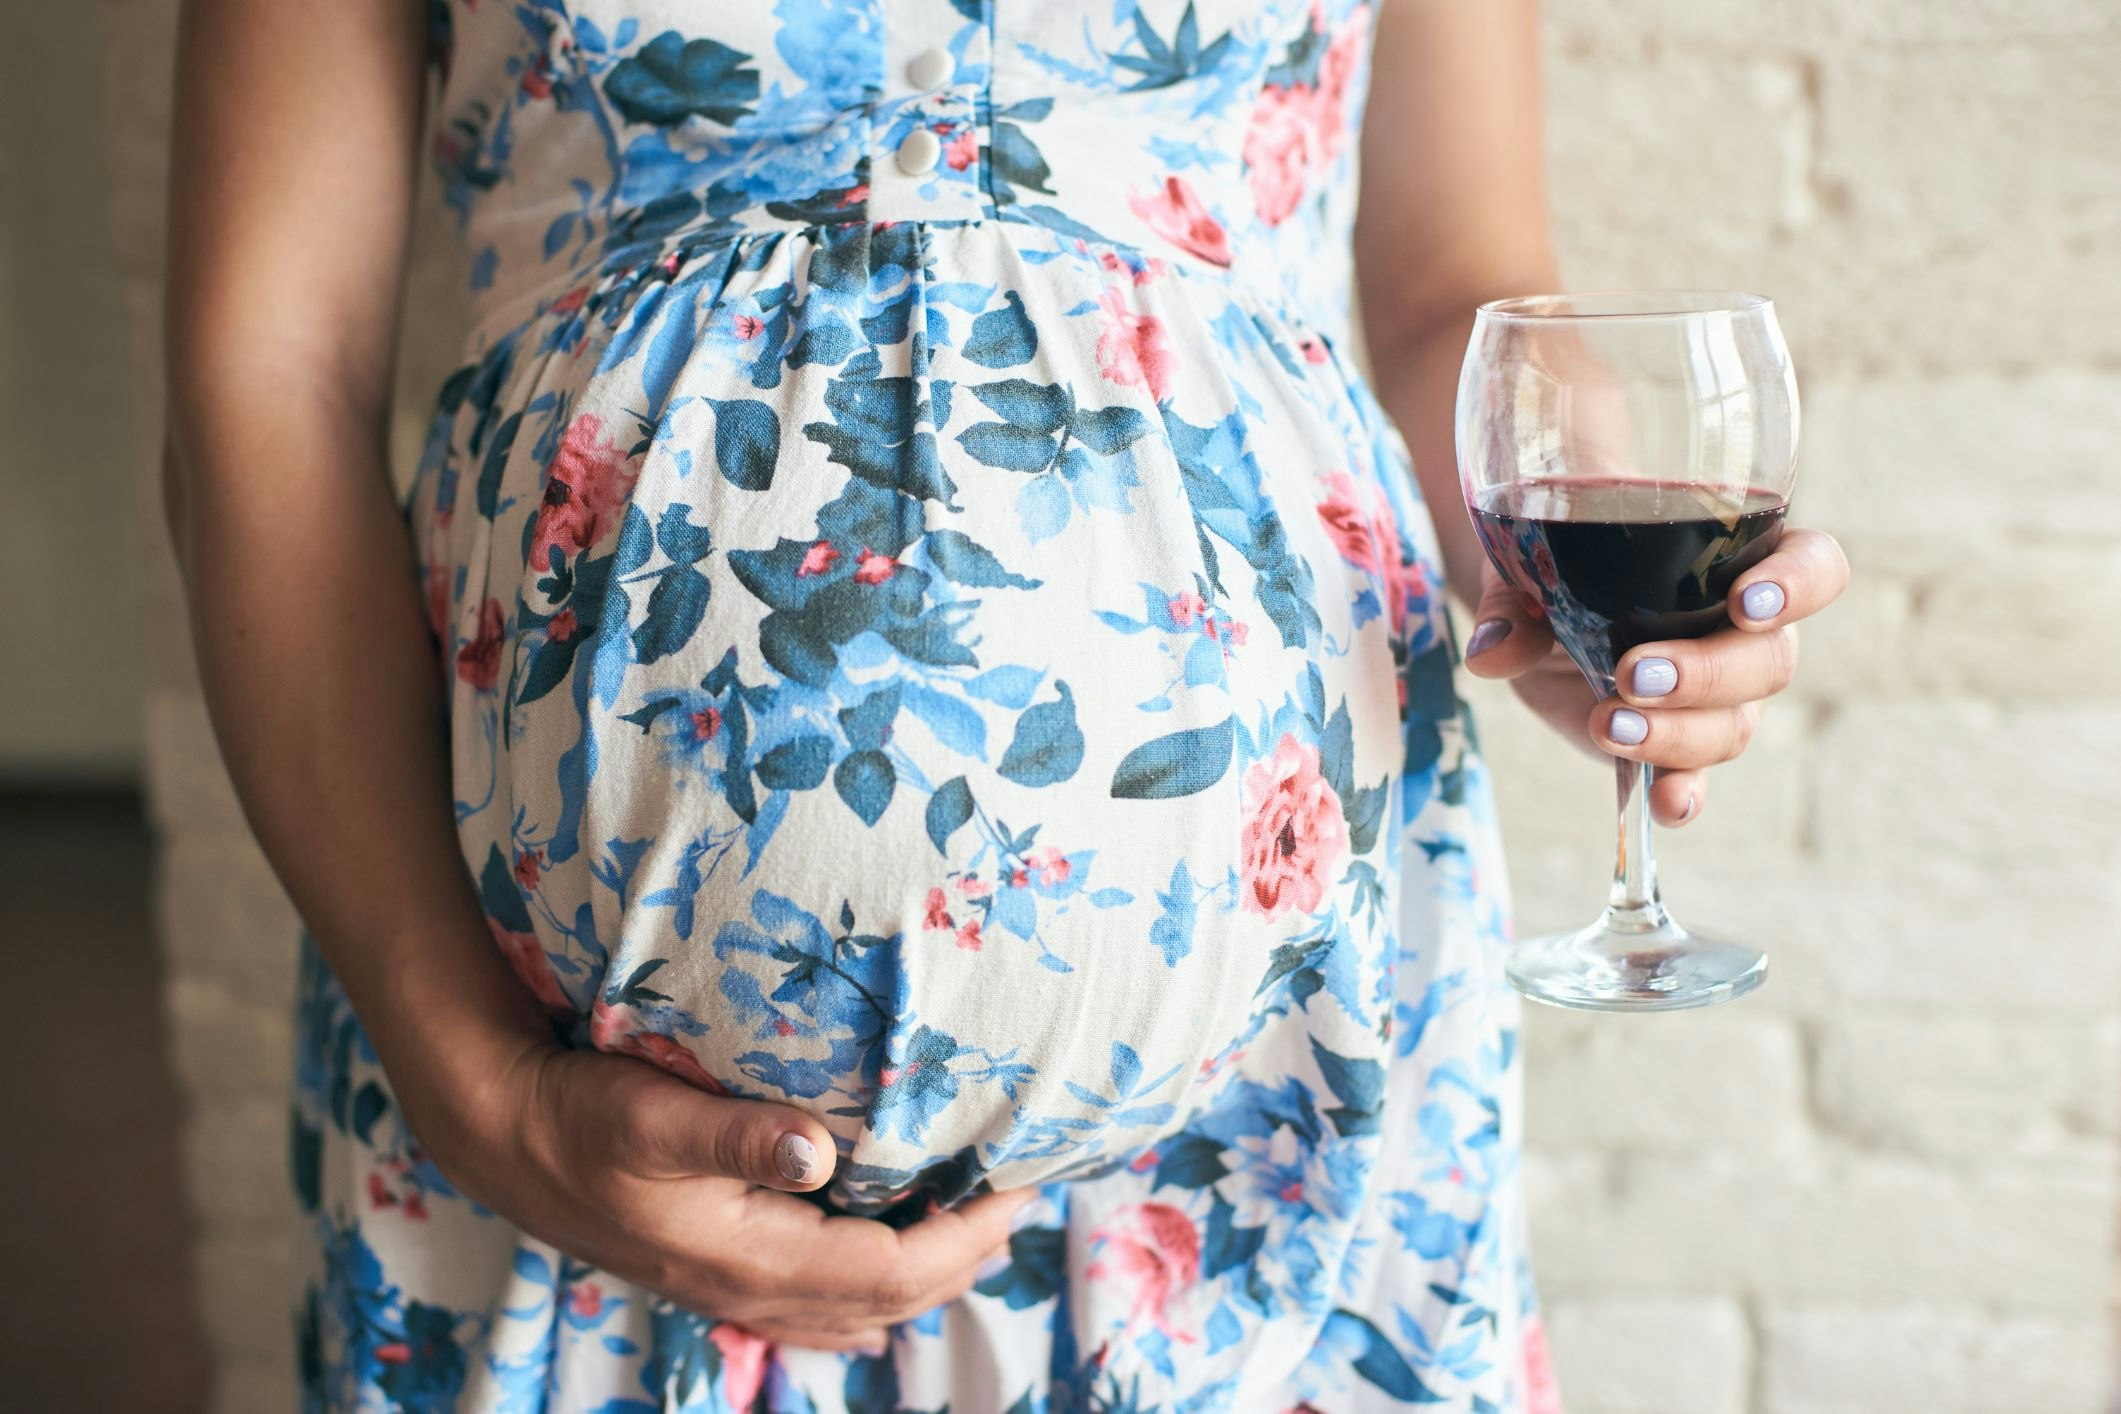 <p>Alcohol consumption guidelines have shifted for pregnant women, but what does that mean for pre-2020 mothers? [Source: Shutterstock]</p>
